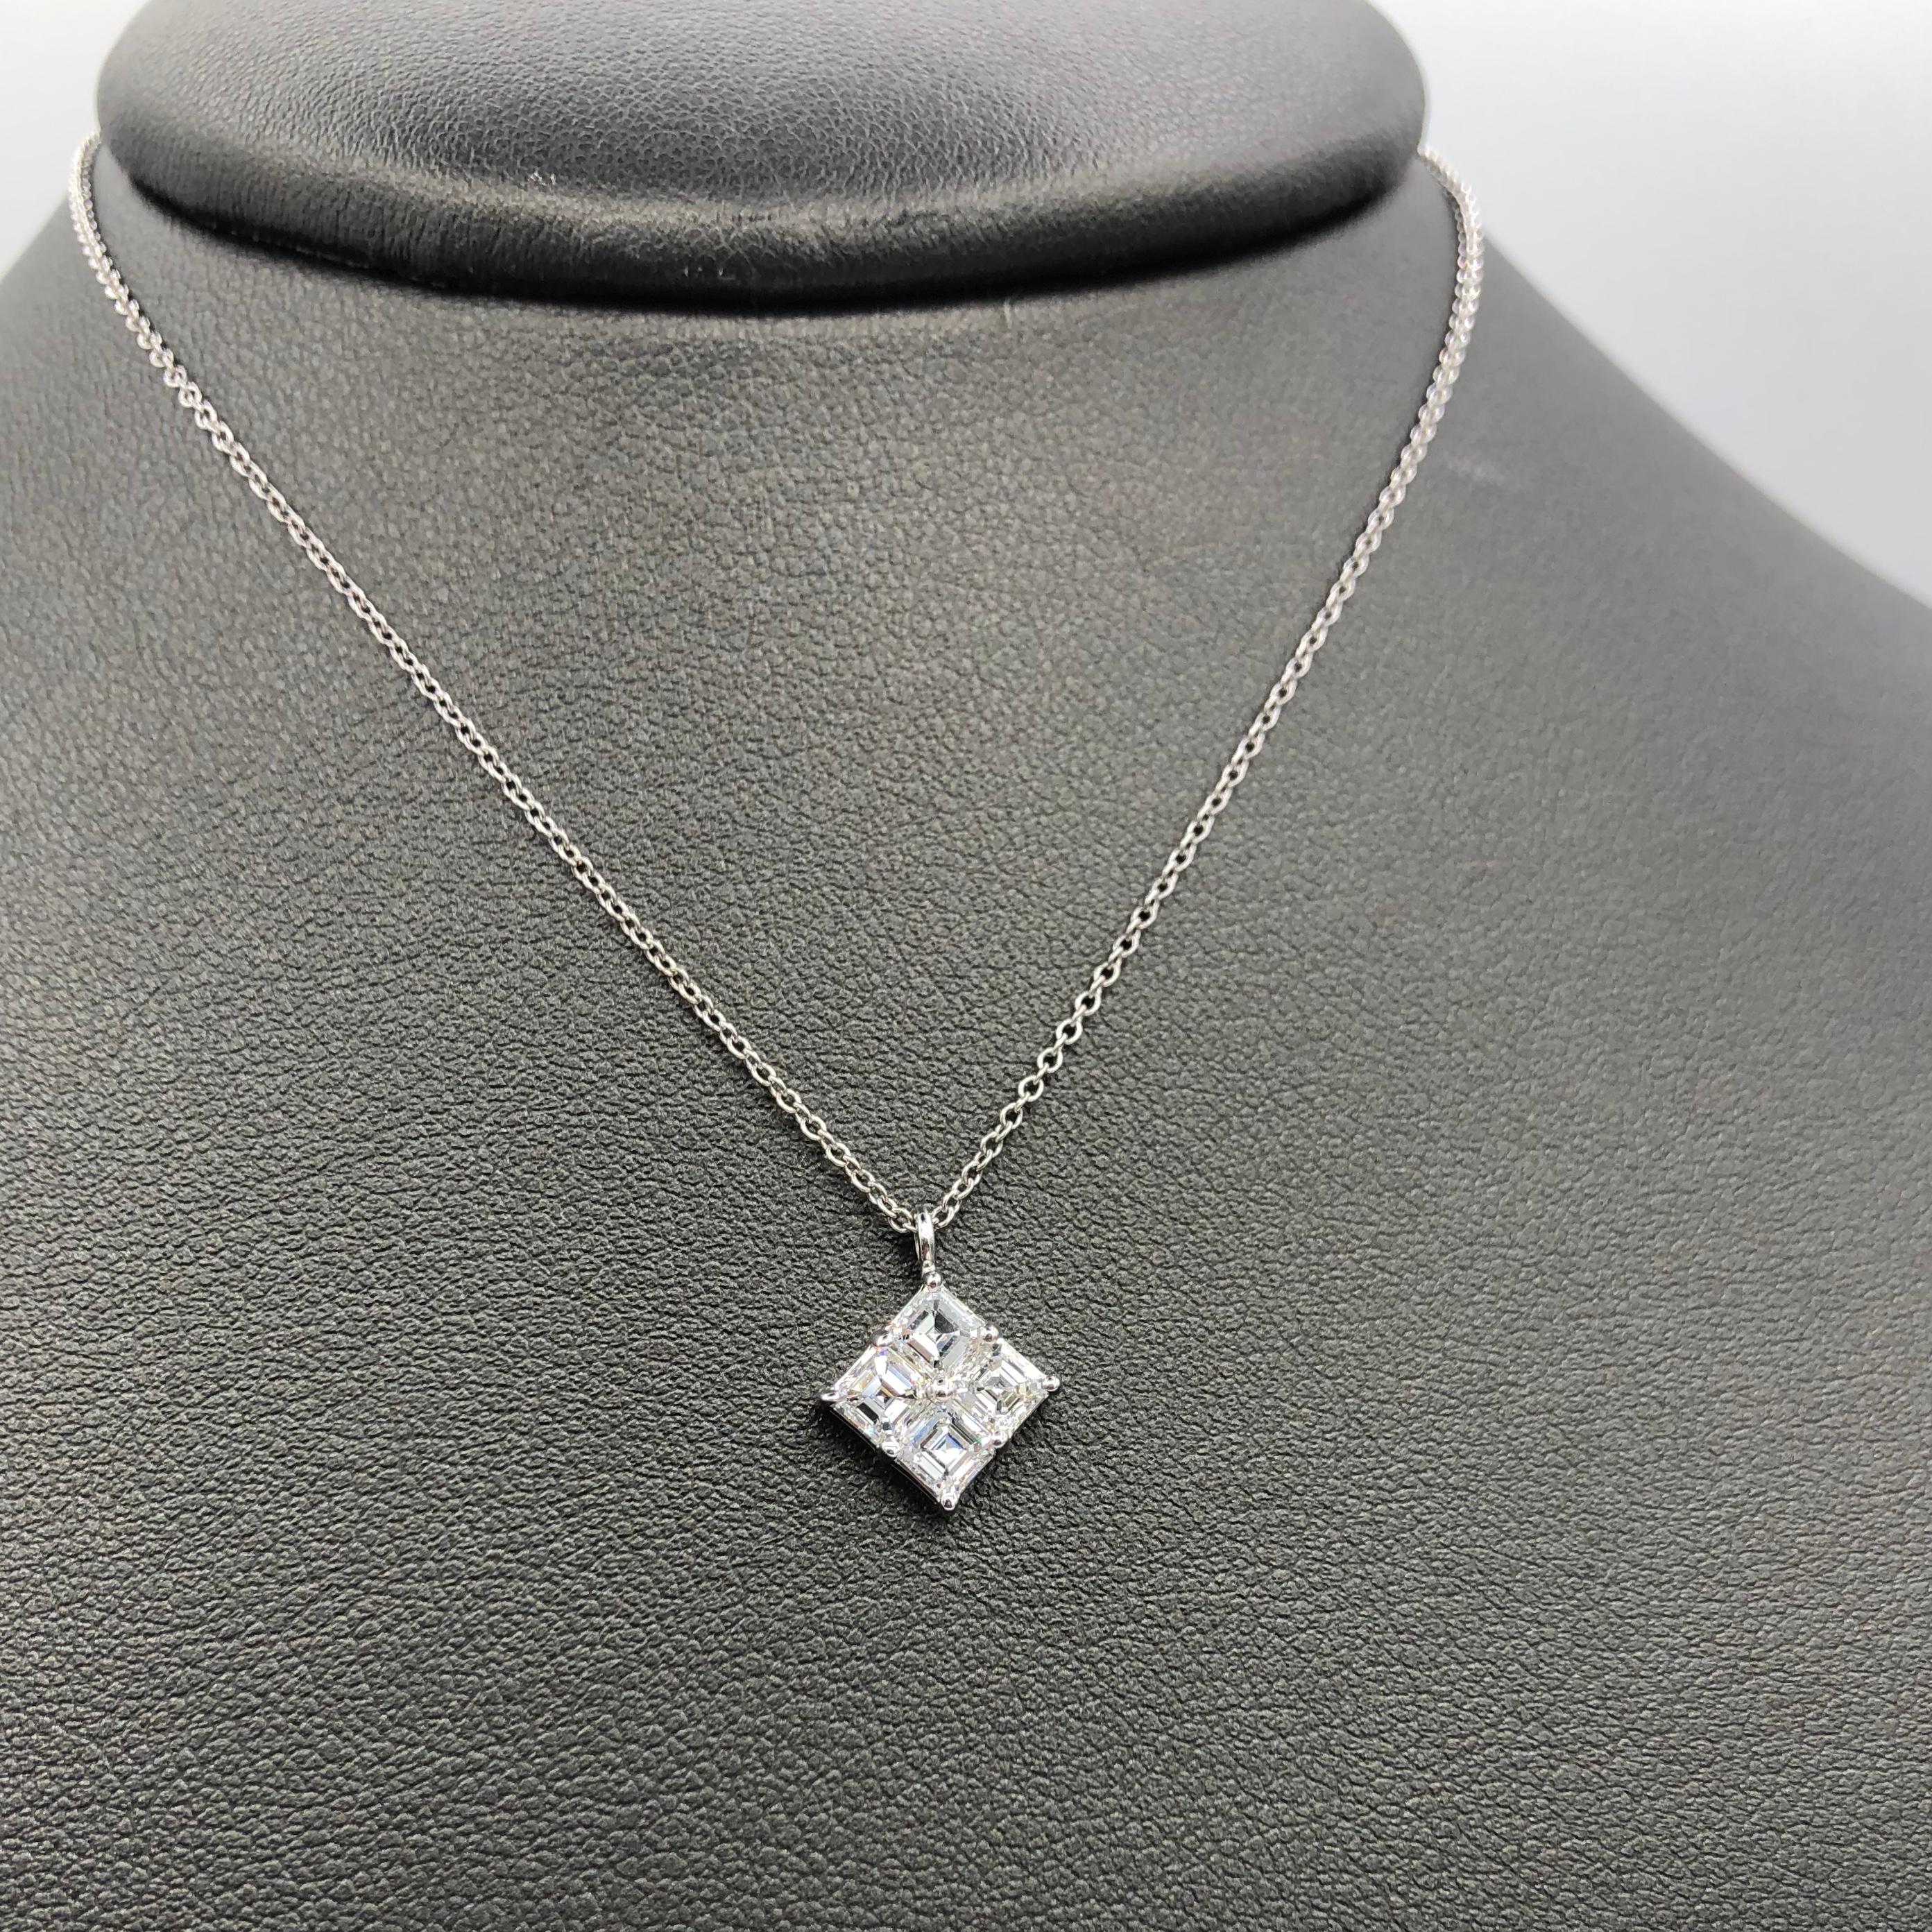 Beautiful Asscher Cut diamond cluster pendant 1.00ct total weight of FG color VS1 diamonds on an  18kt white gold with 16